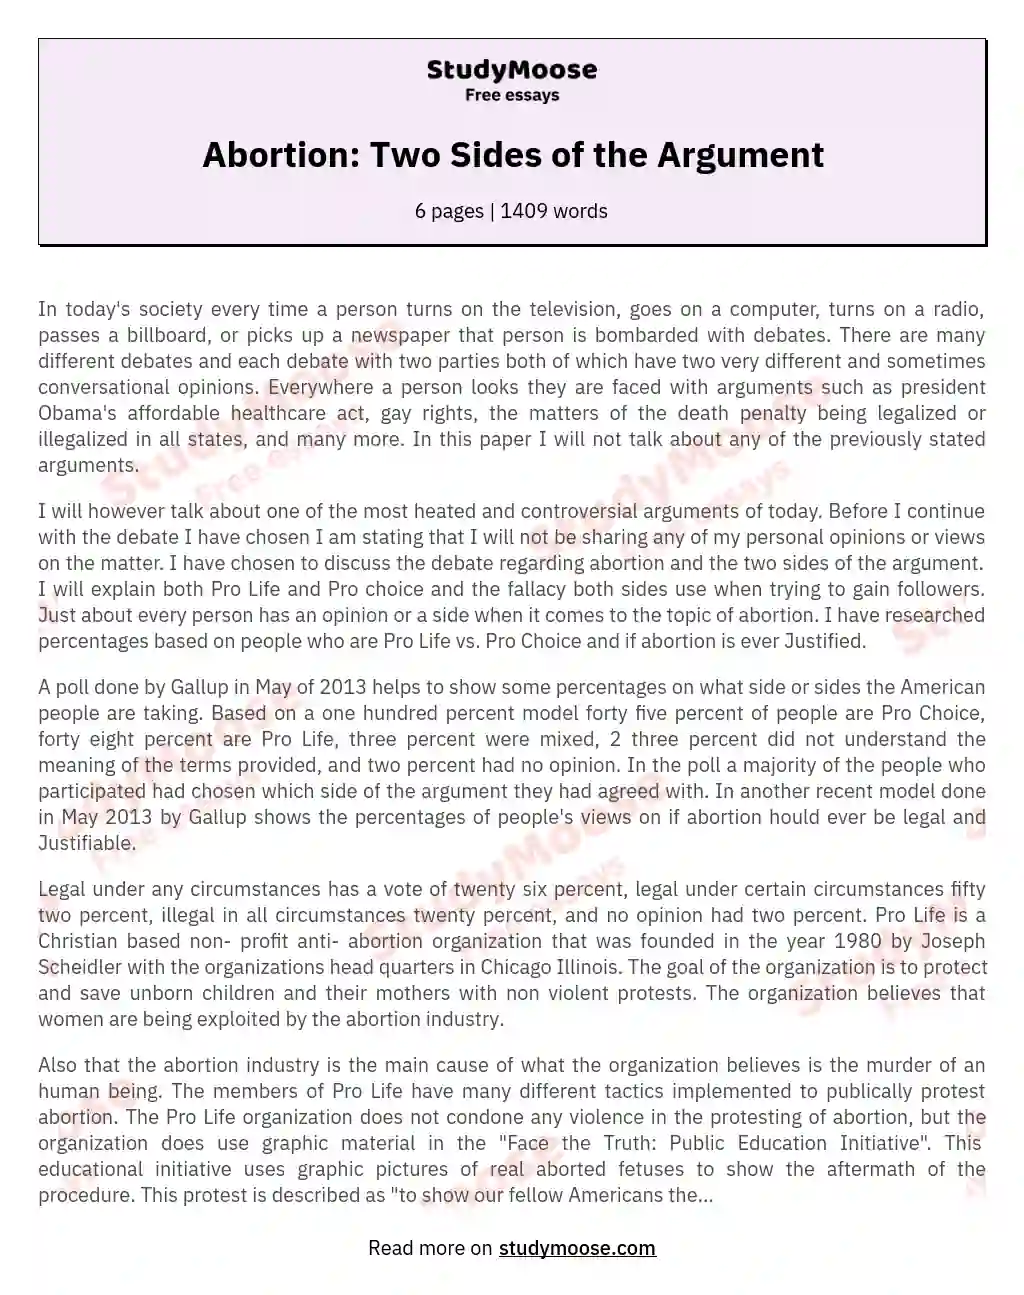 Abortion: Two Sides of the Argument